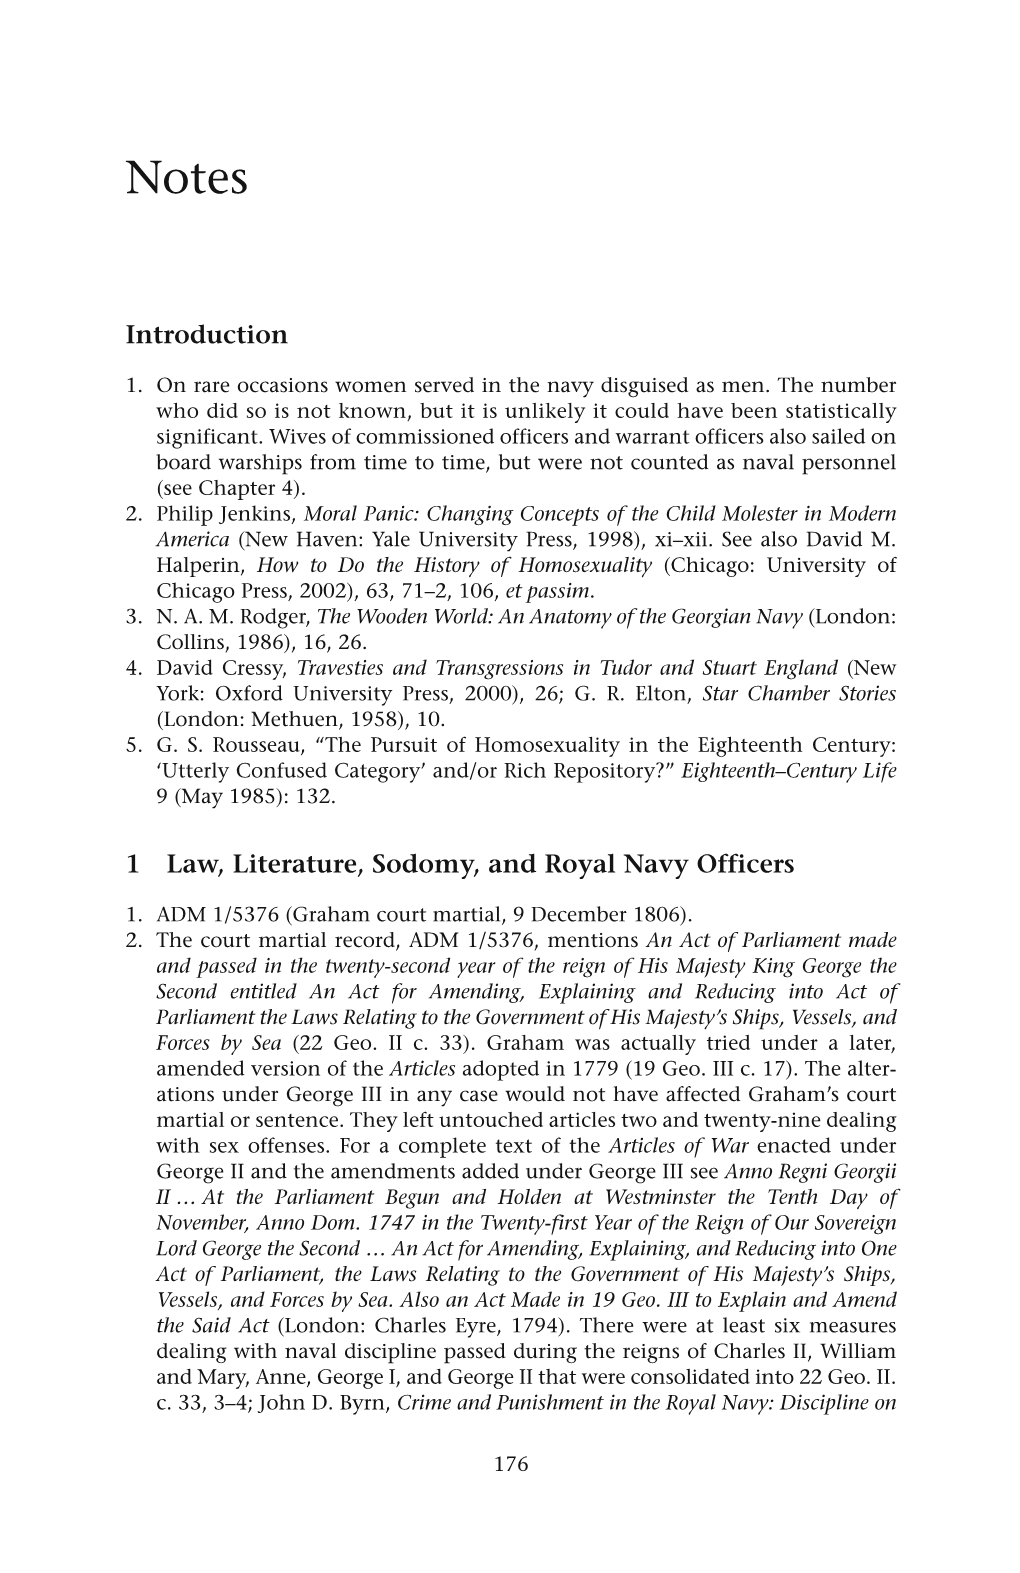 Introduction 1 Law, Literature, Sodomy, and Royal Navy Officers